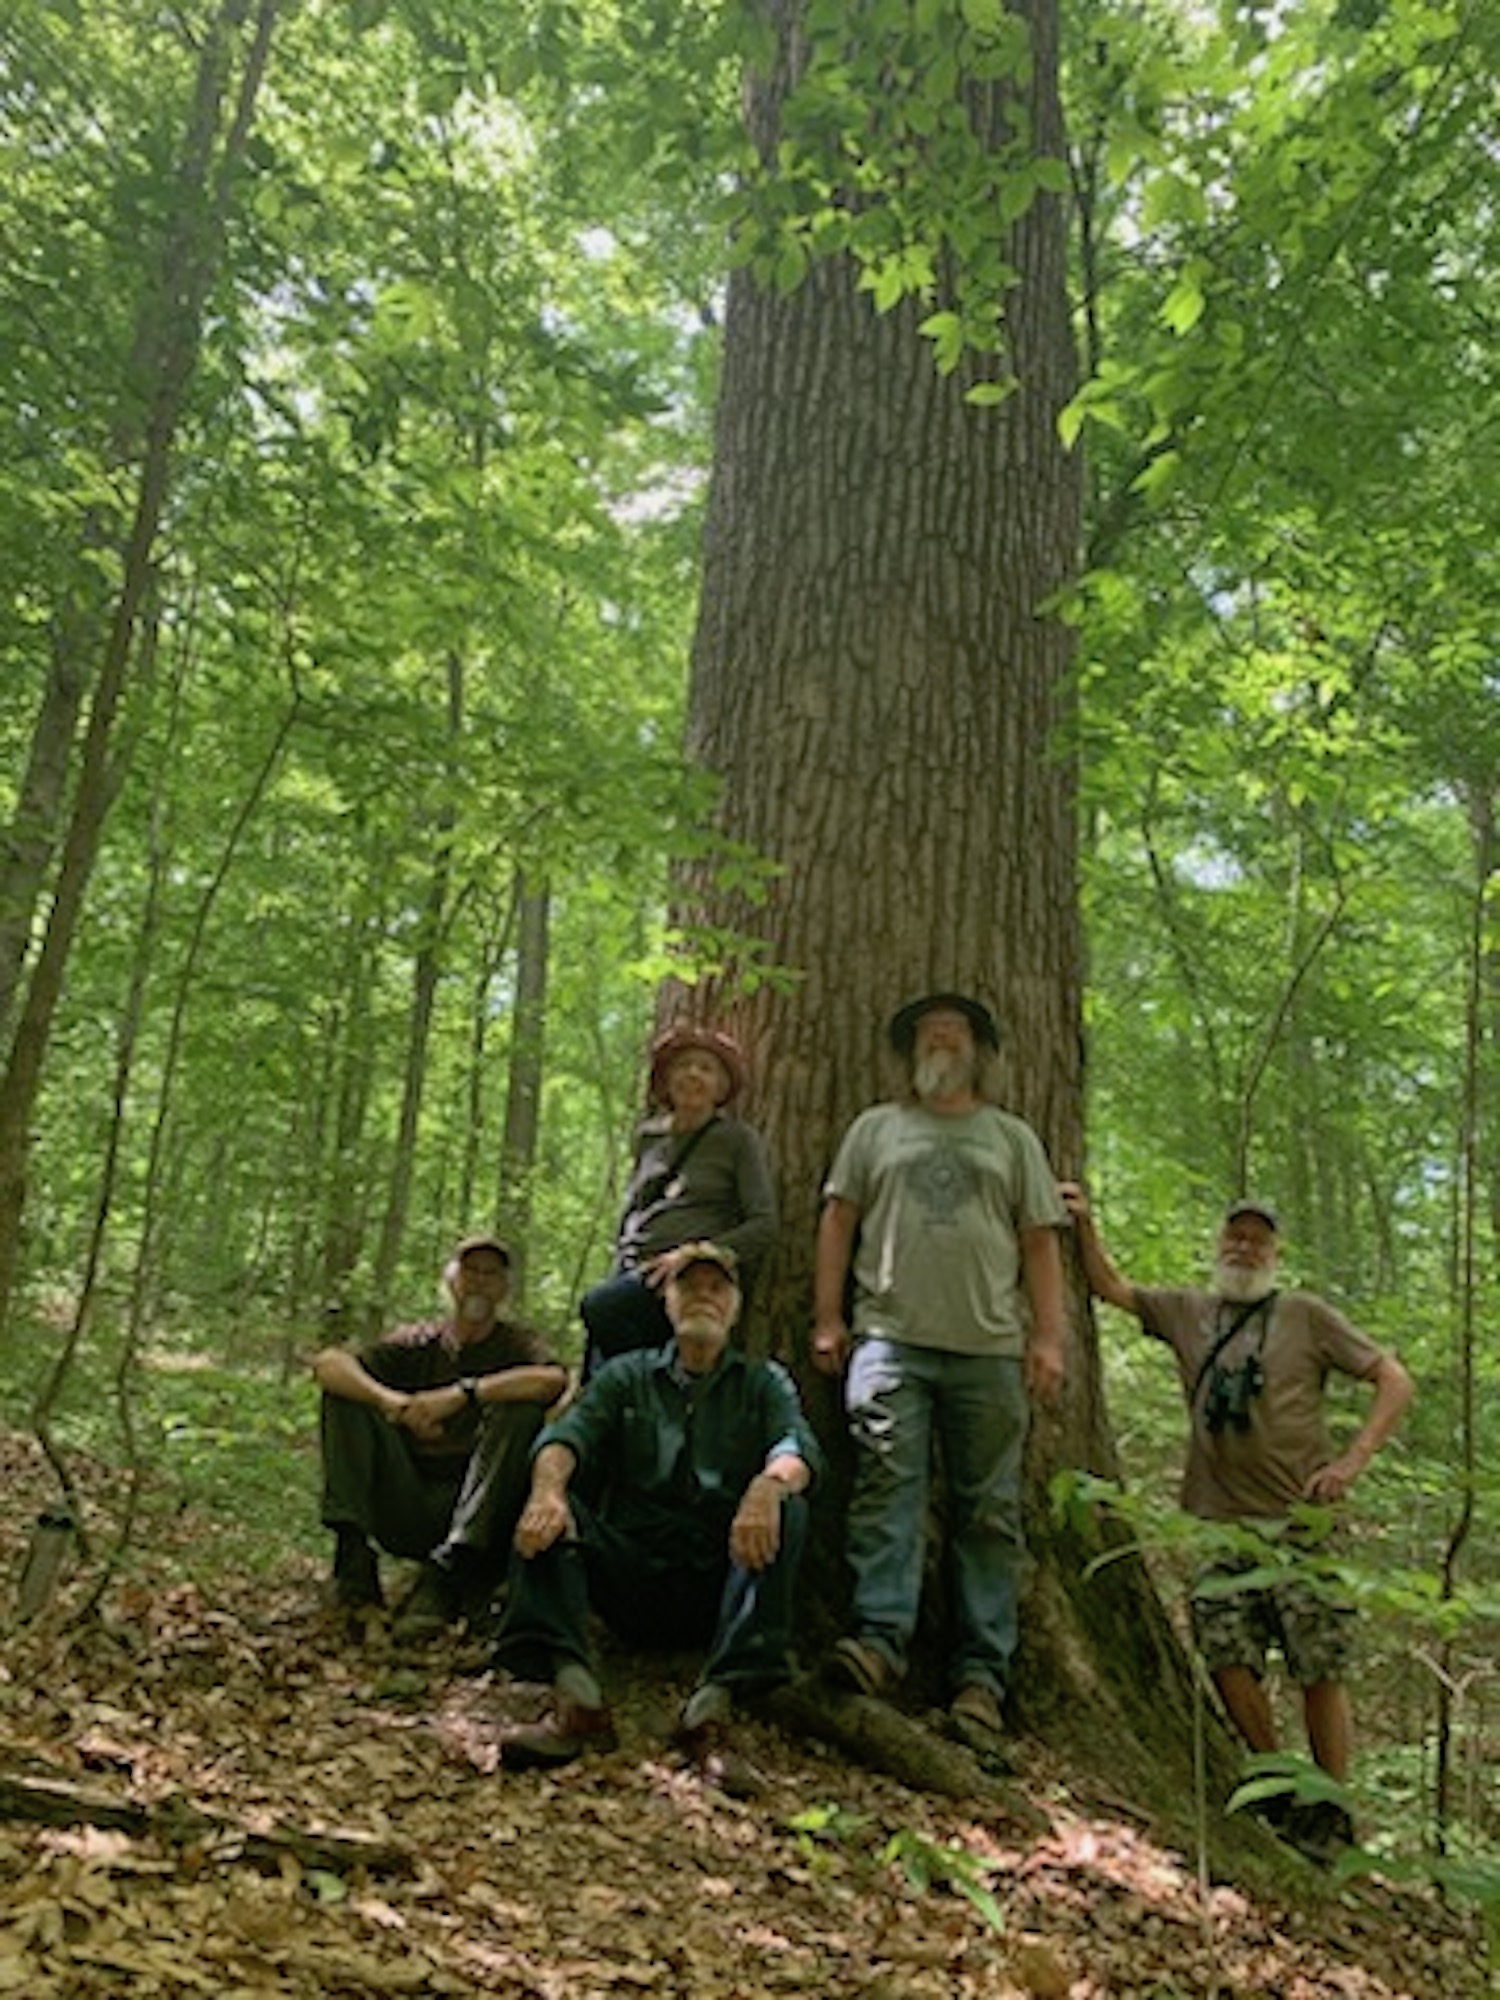 Forest Protectors standing in front of large tree in forest